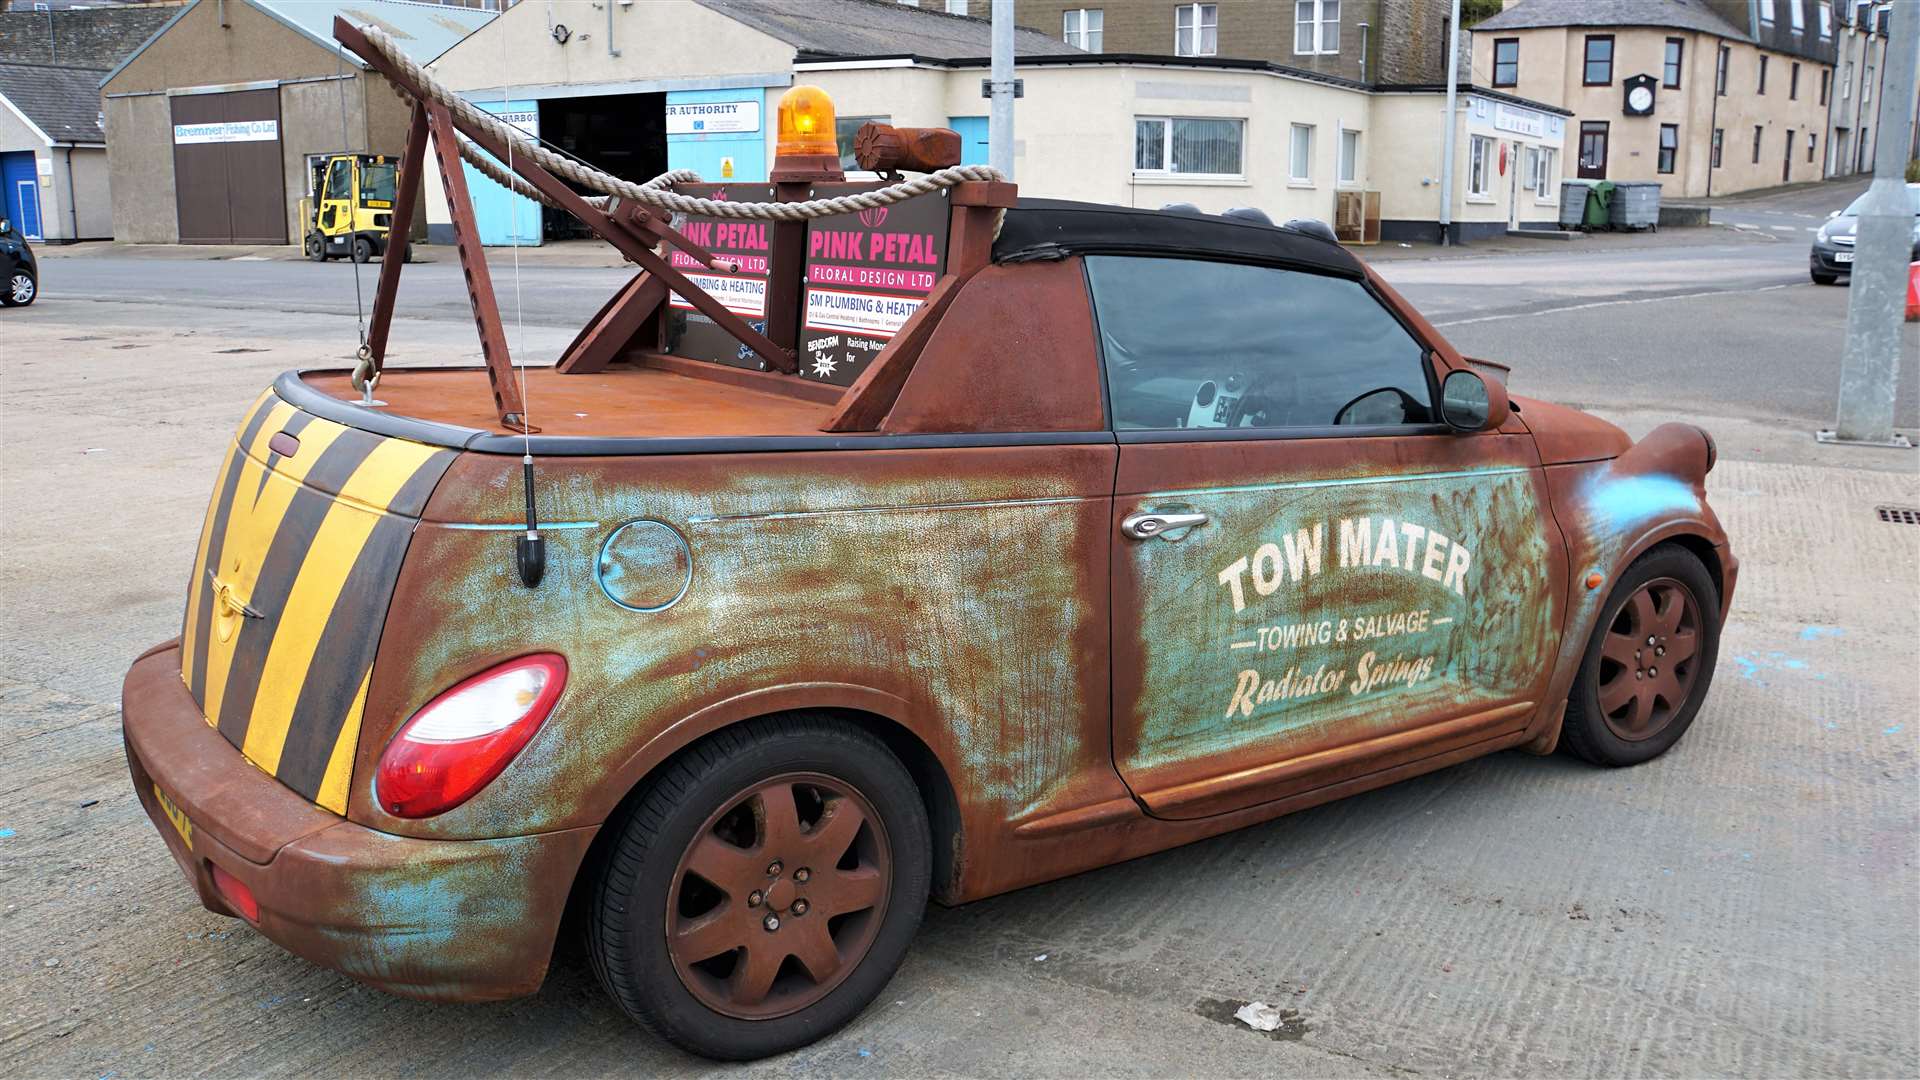 Tow Mater gets revved up and ready to rumble out of Wick.